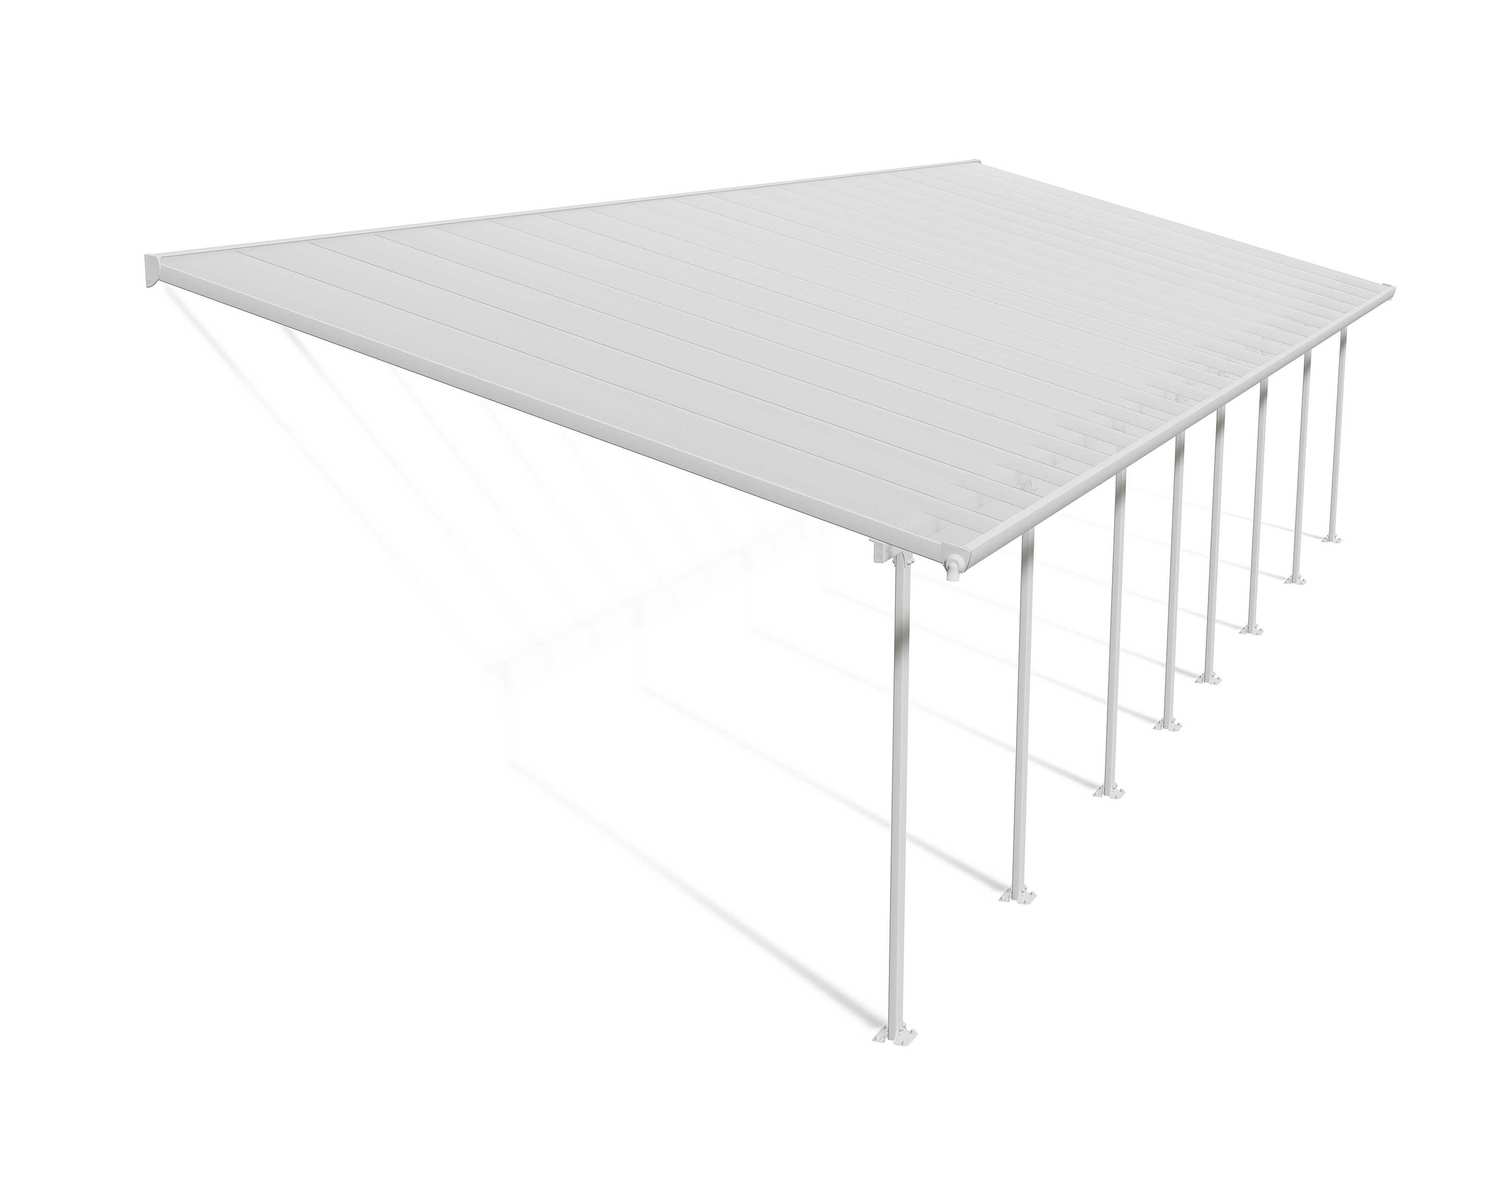 Feria 13 ft. x 40 ft. White Aluminium Patio Cover With 8 Posts, Clear Twin-Wall Polycarbonate Roof Panels.